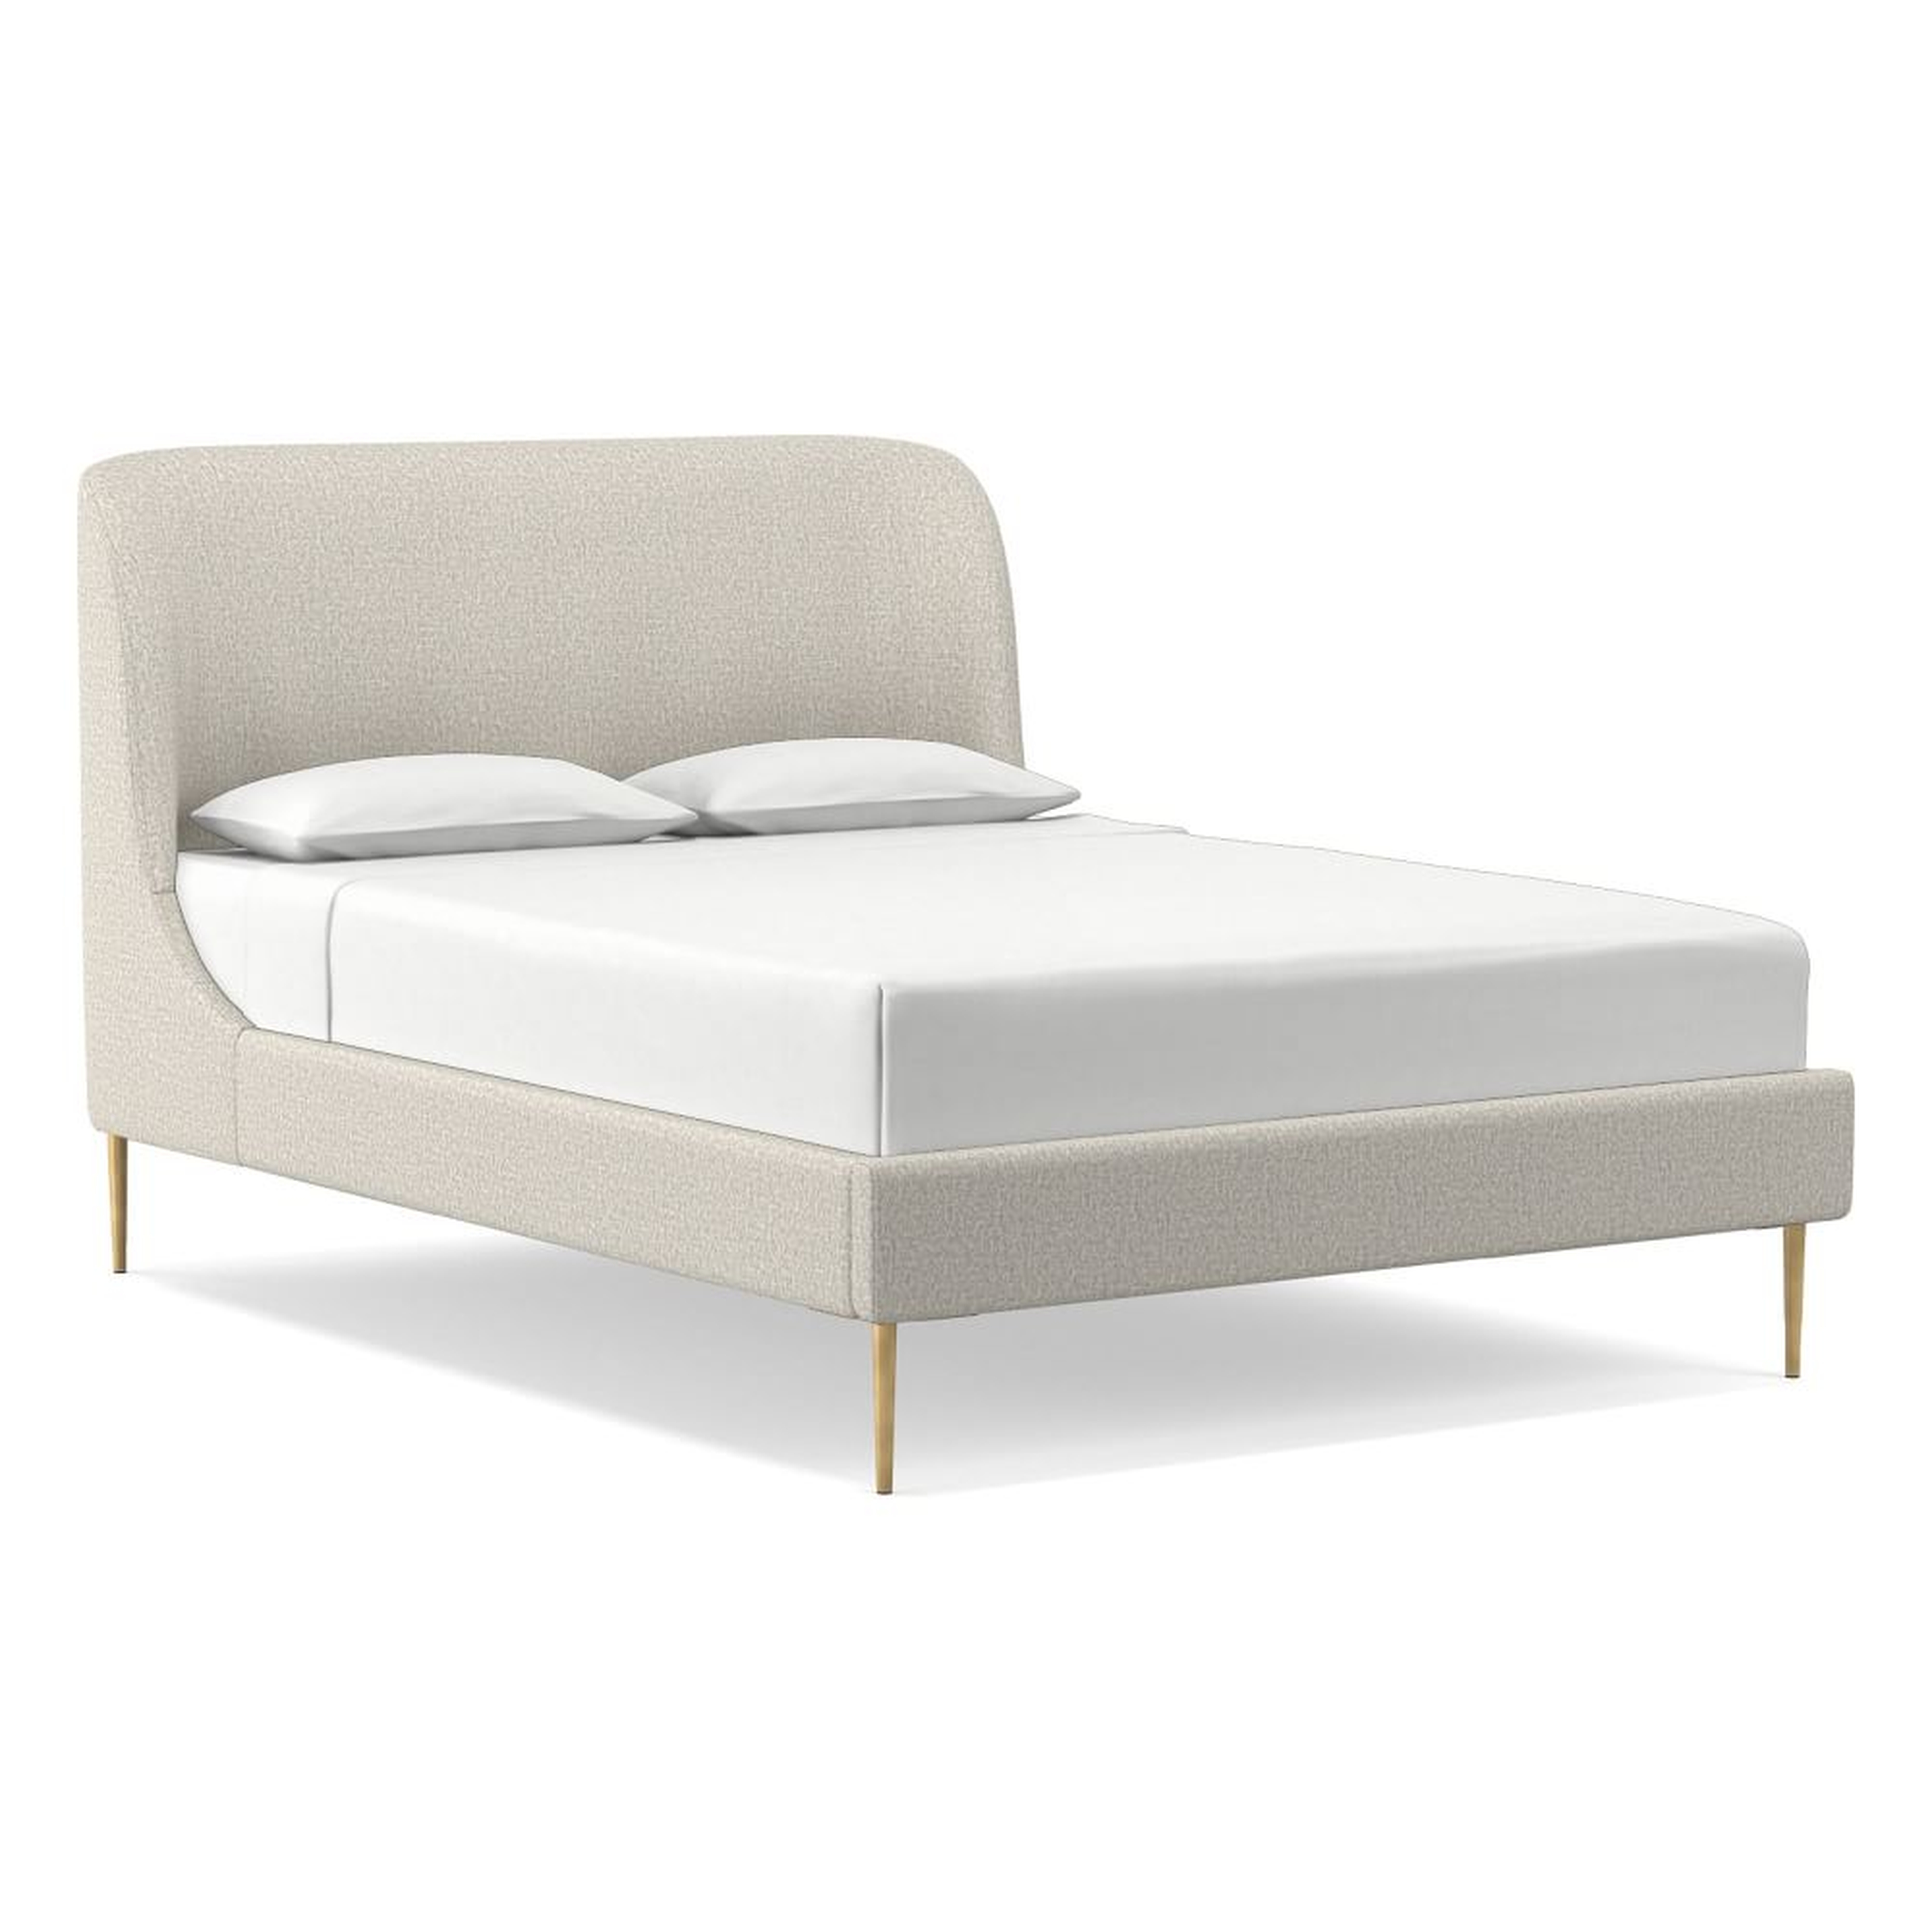 Lana Upholstered Bed, King, Twill, Dove - West Elm